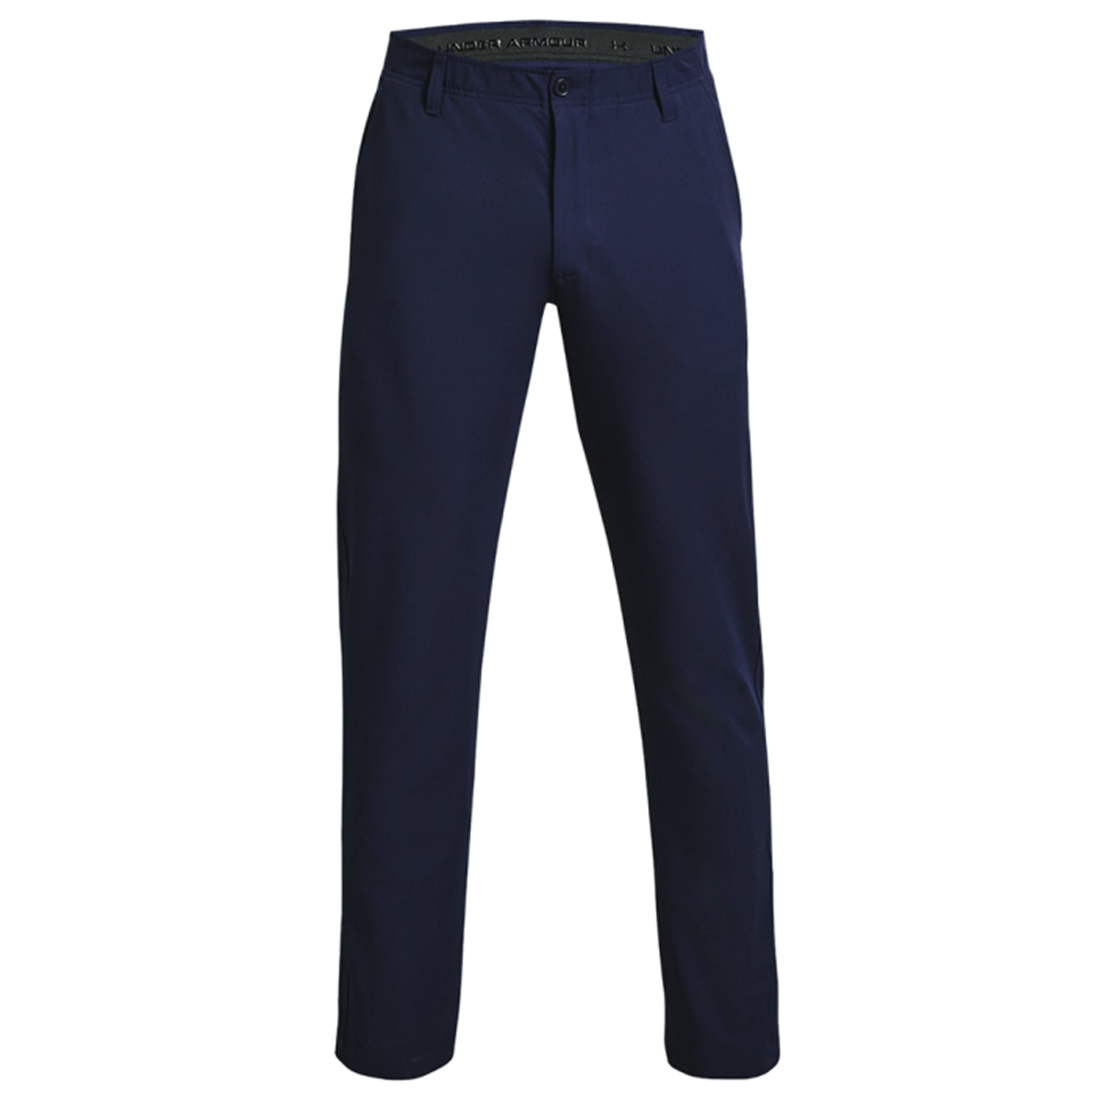 Under Armour Drive Tapered Men's Navy/Gray Pants